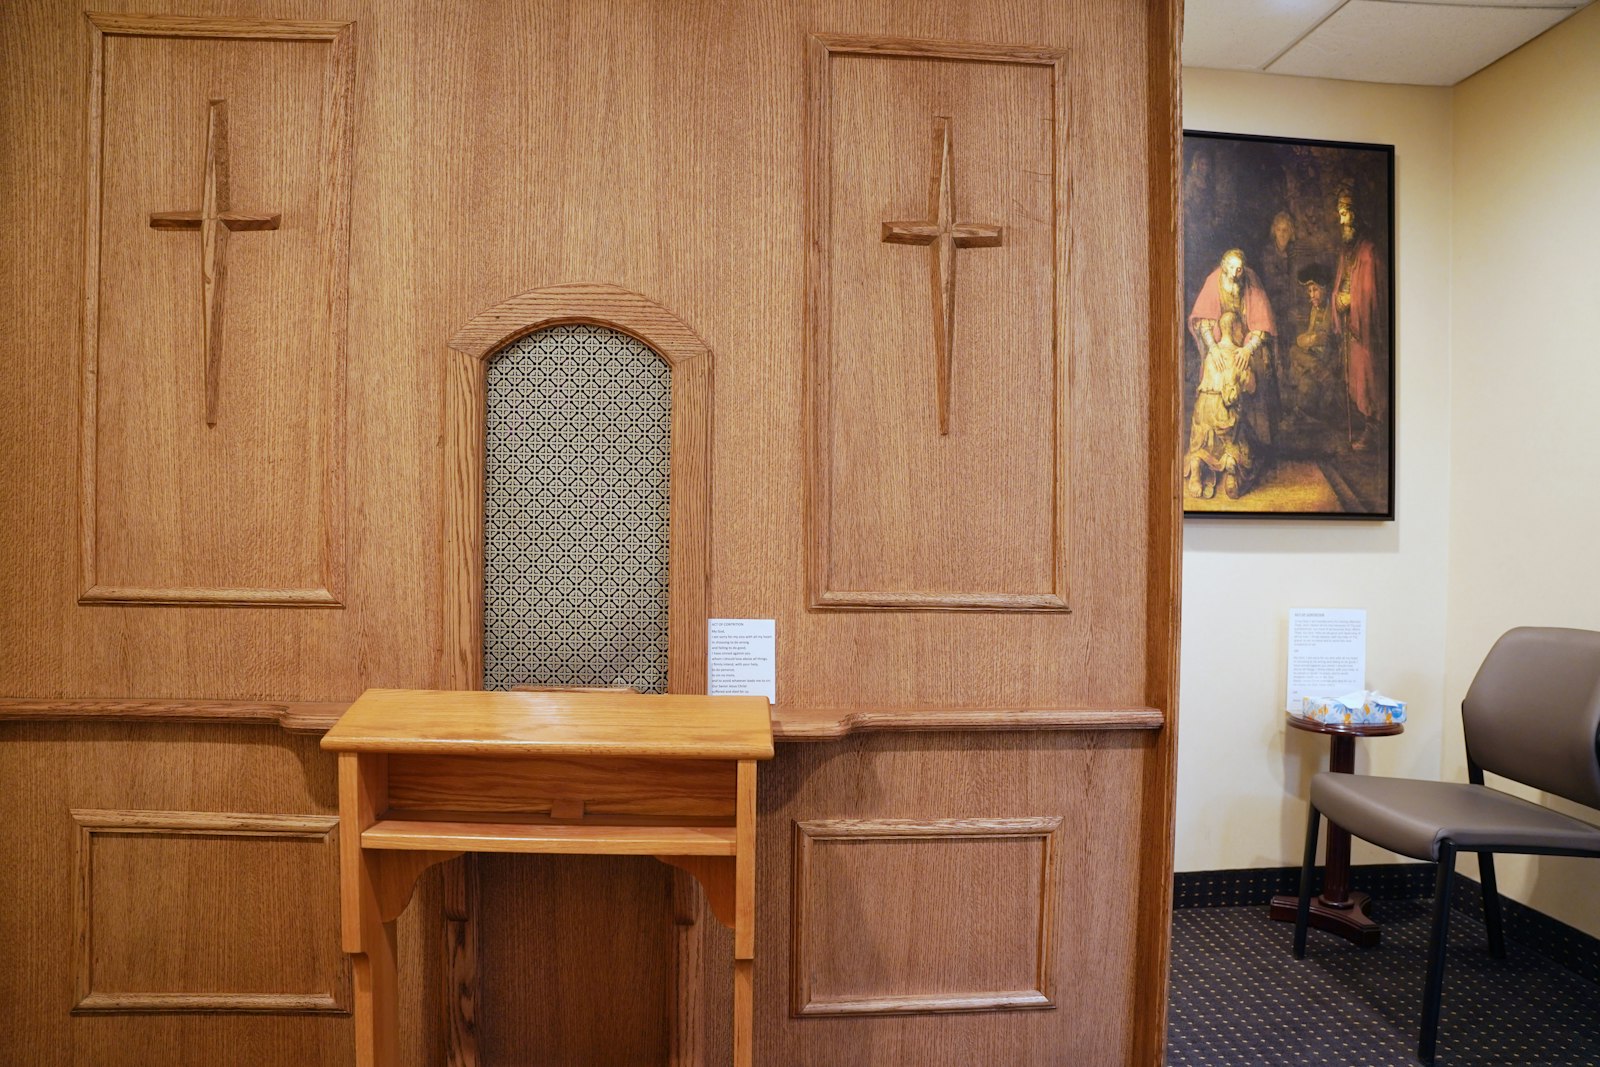 People have the opportunity to confess behind a screen or face-to-face at Prince of Peace Parish. Fr. Andrew Dawson made refurbishing the reconciliation room a priority when he came to the parish in July 2023.